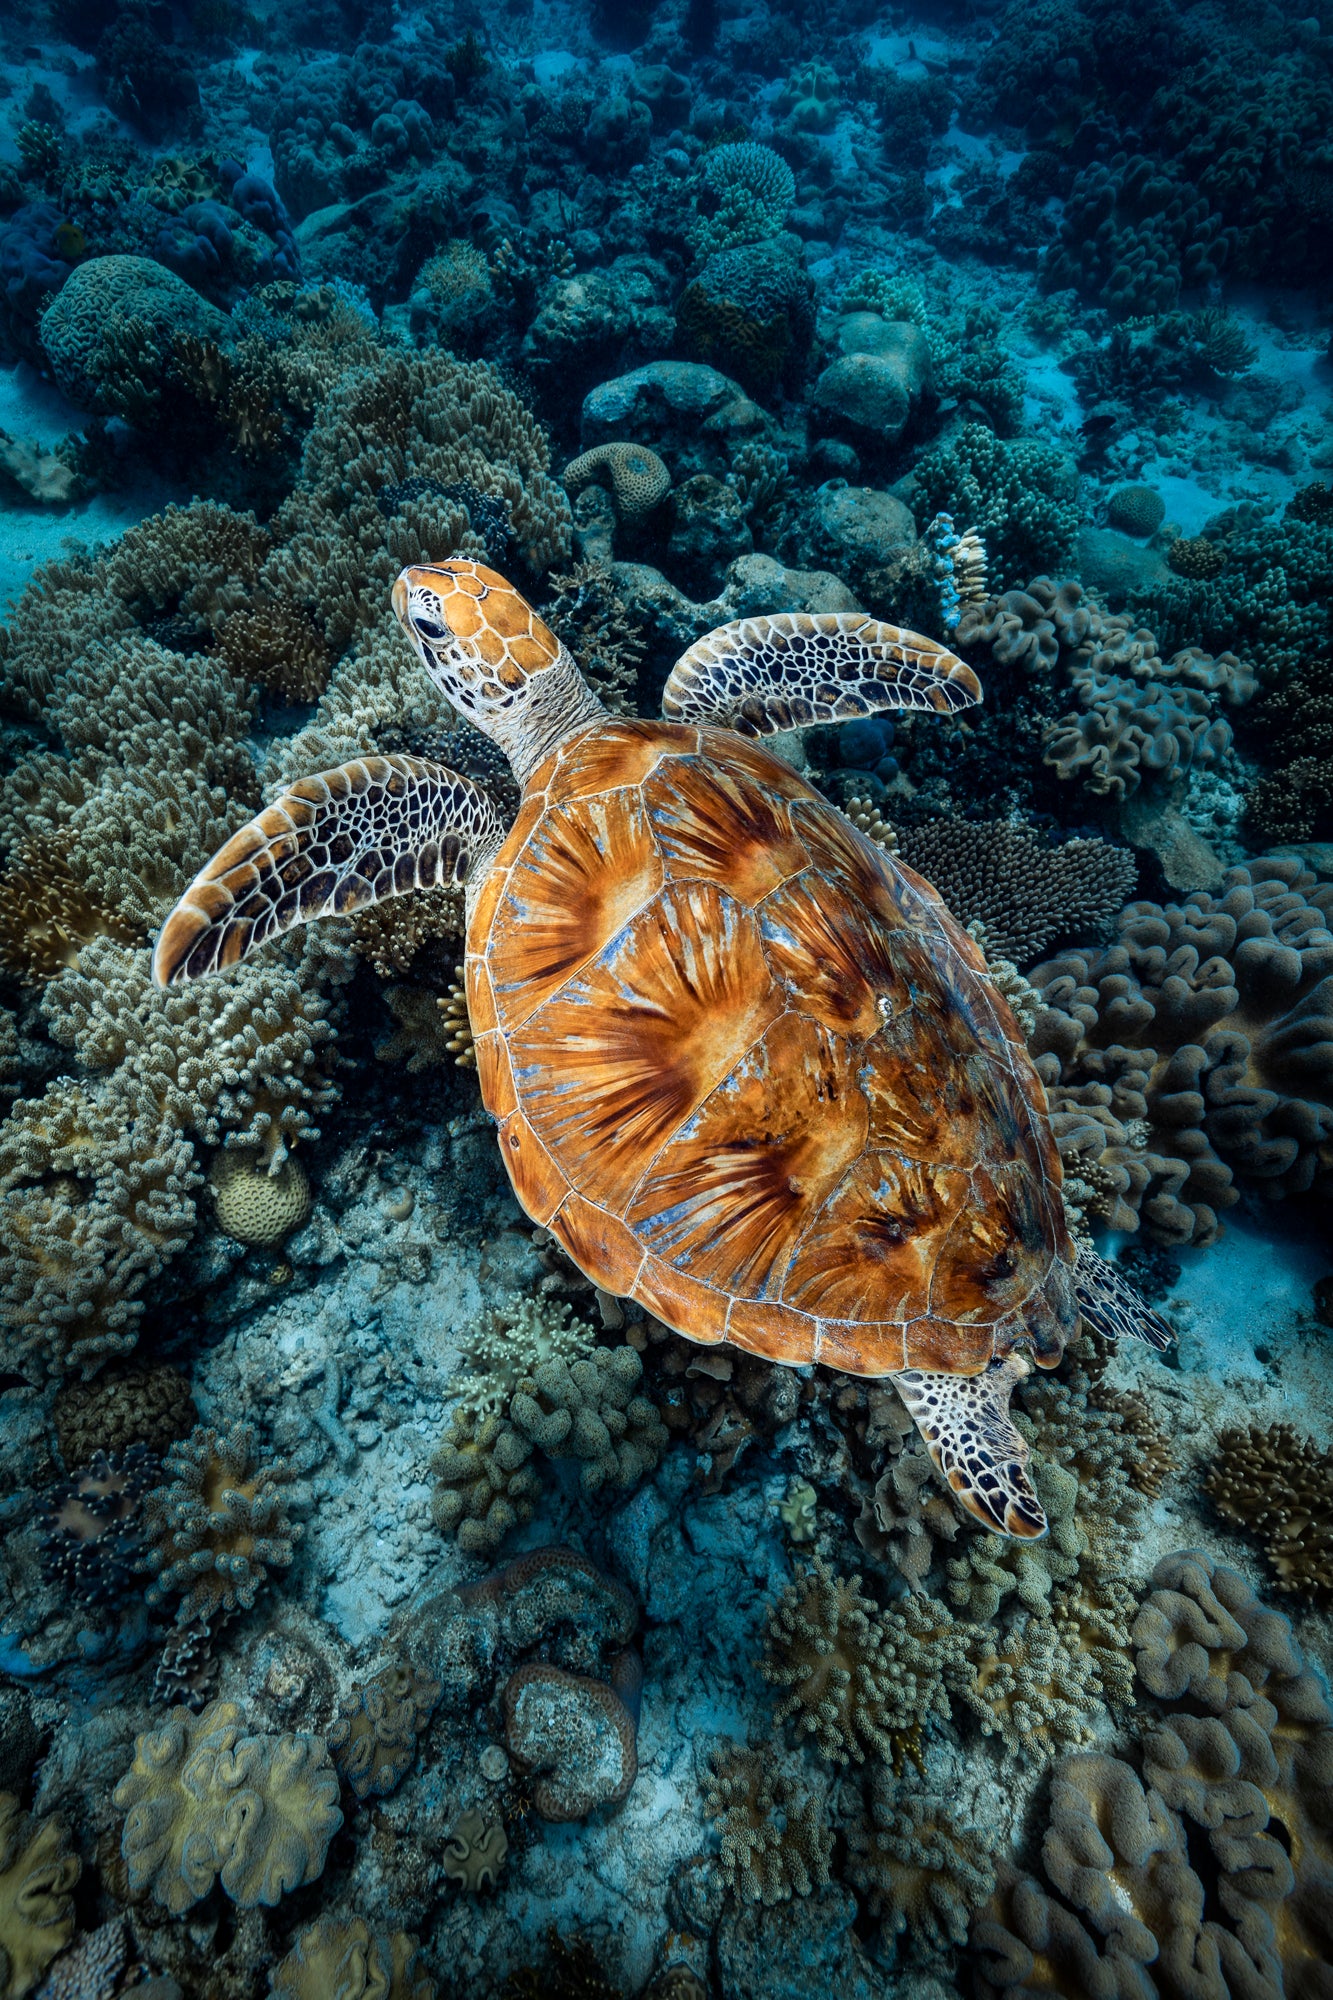 sea turtle with splashes of vibrant blue colour on his shell gliding across a bed of reef